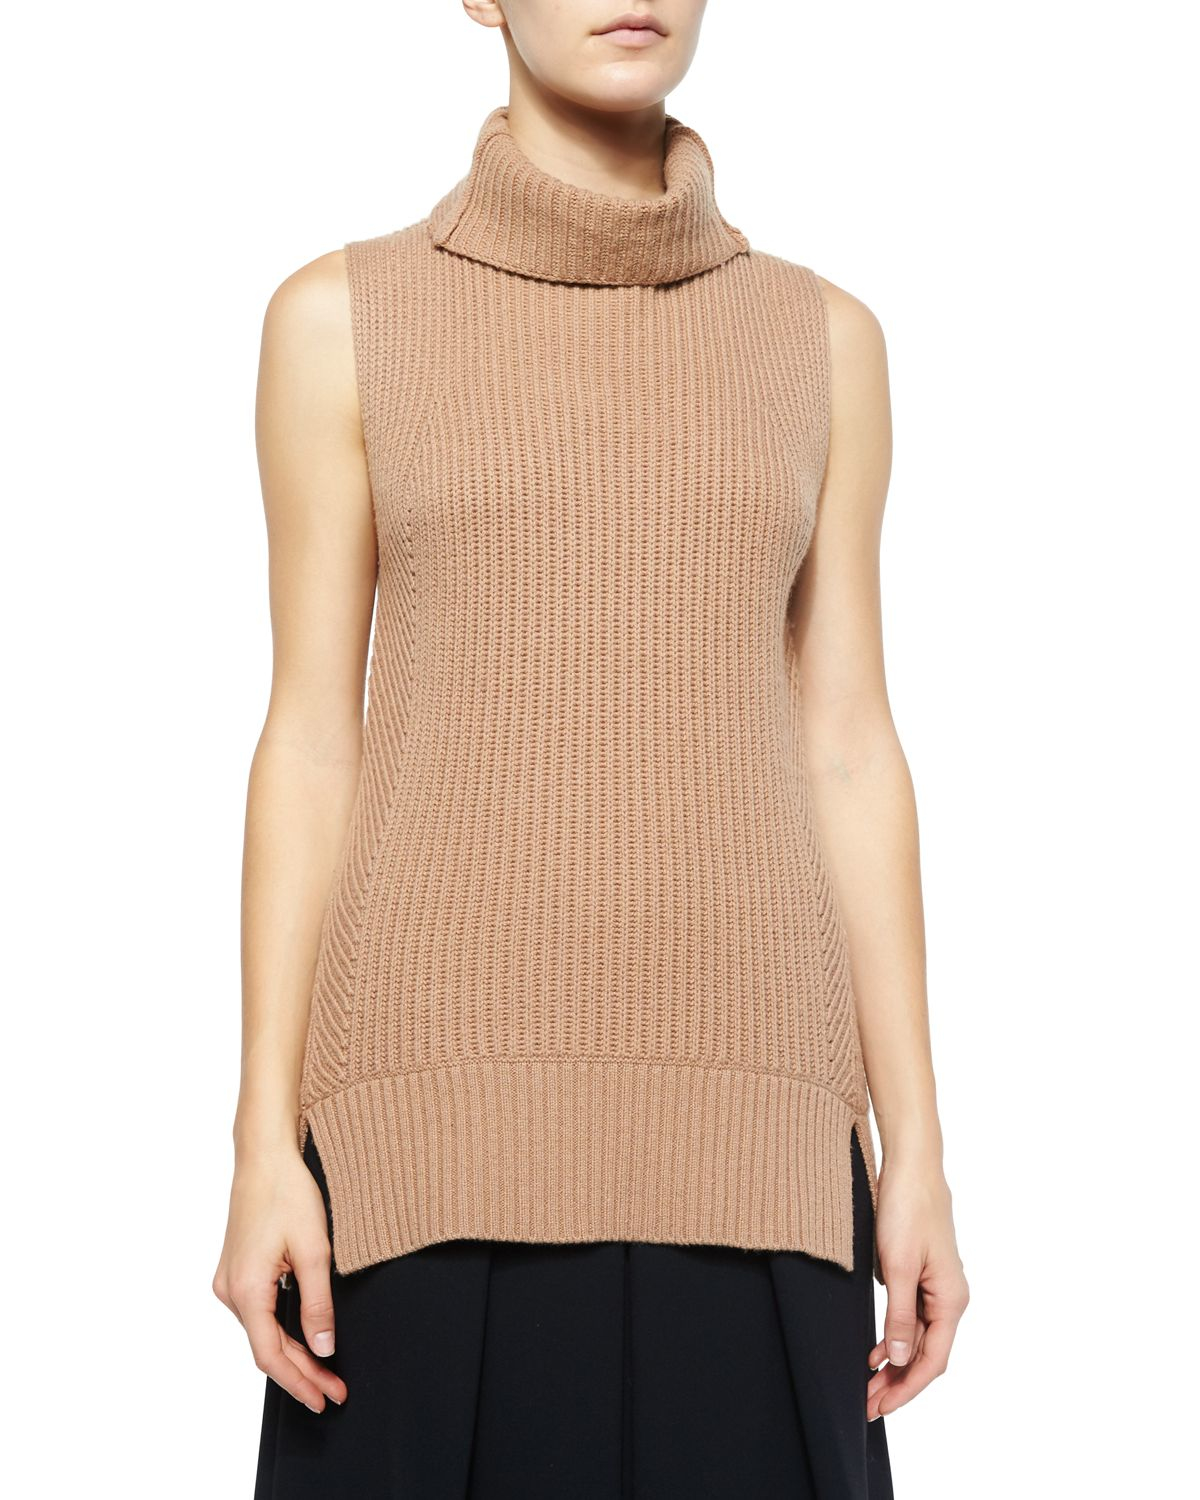 Vince Ribbed Sleeveless Turtleneck Sweater in Brown (ALMOND) - Save 69% ...